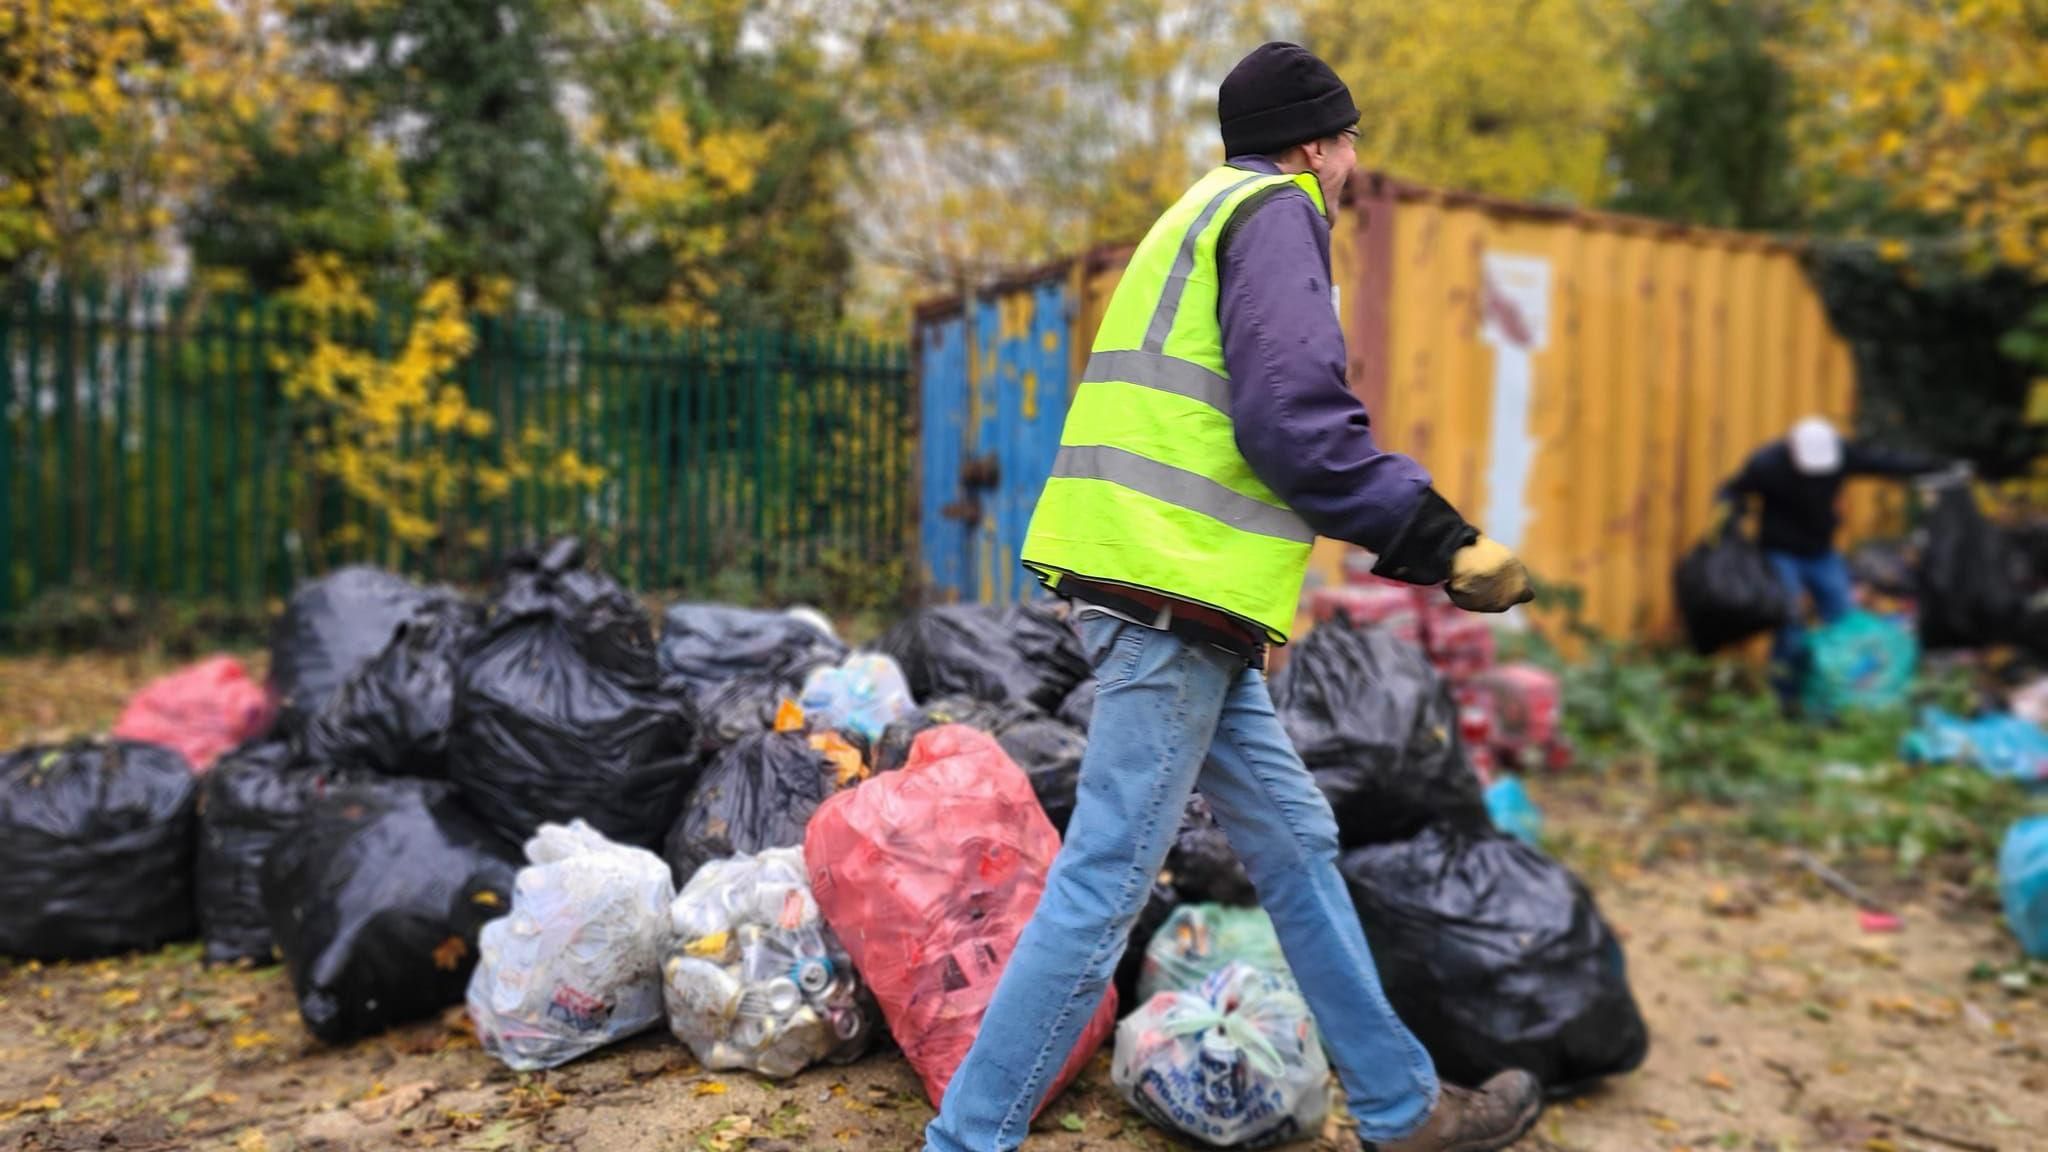 Peterborough community litter-pick collects half a tonne of cans - BBC News